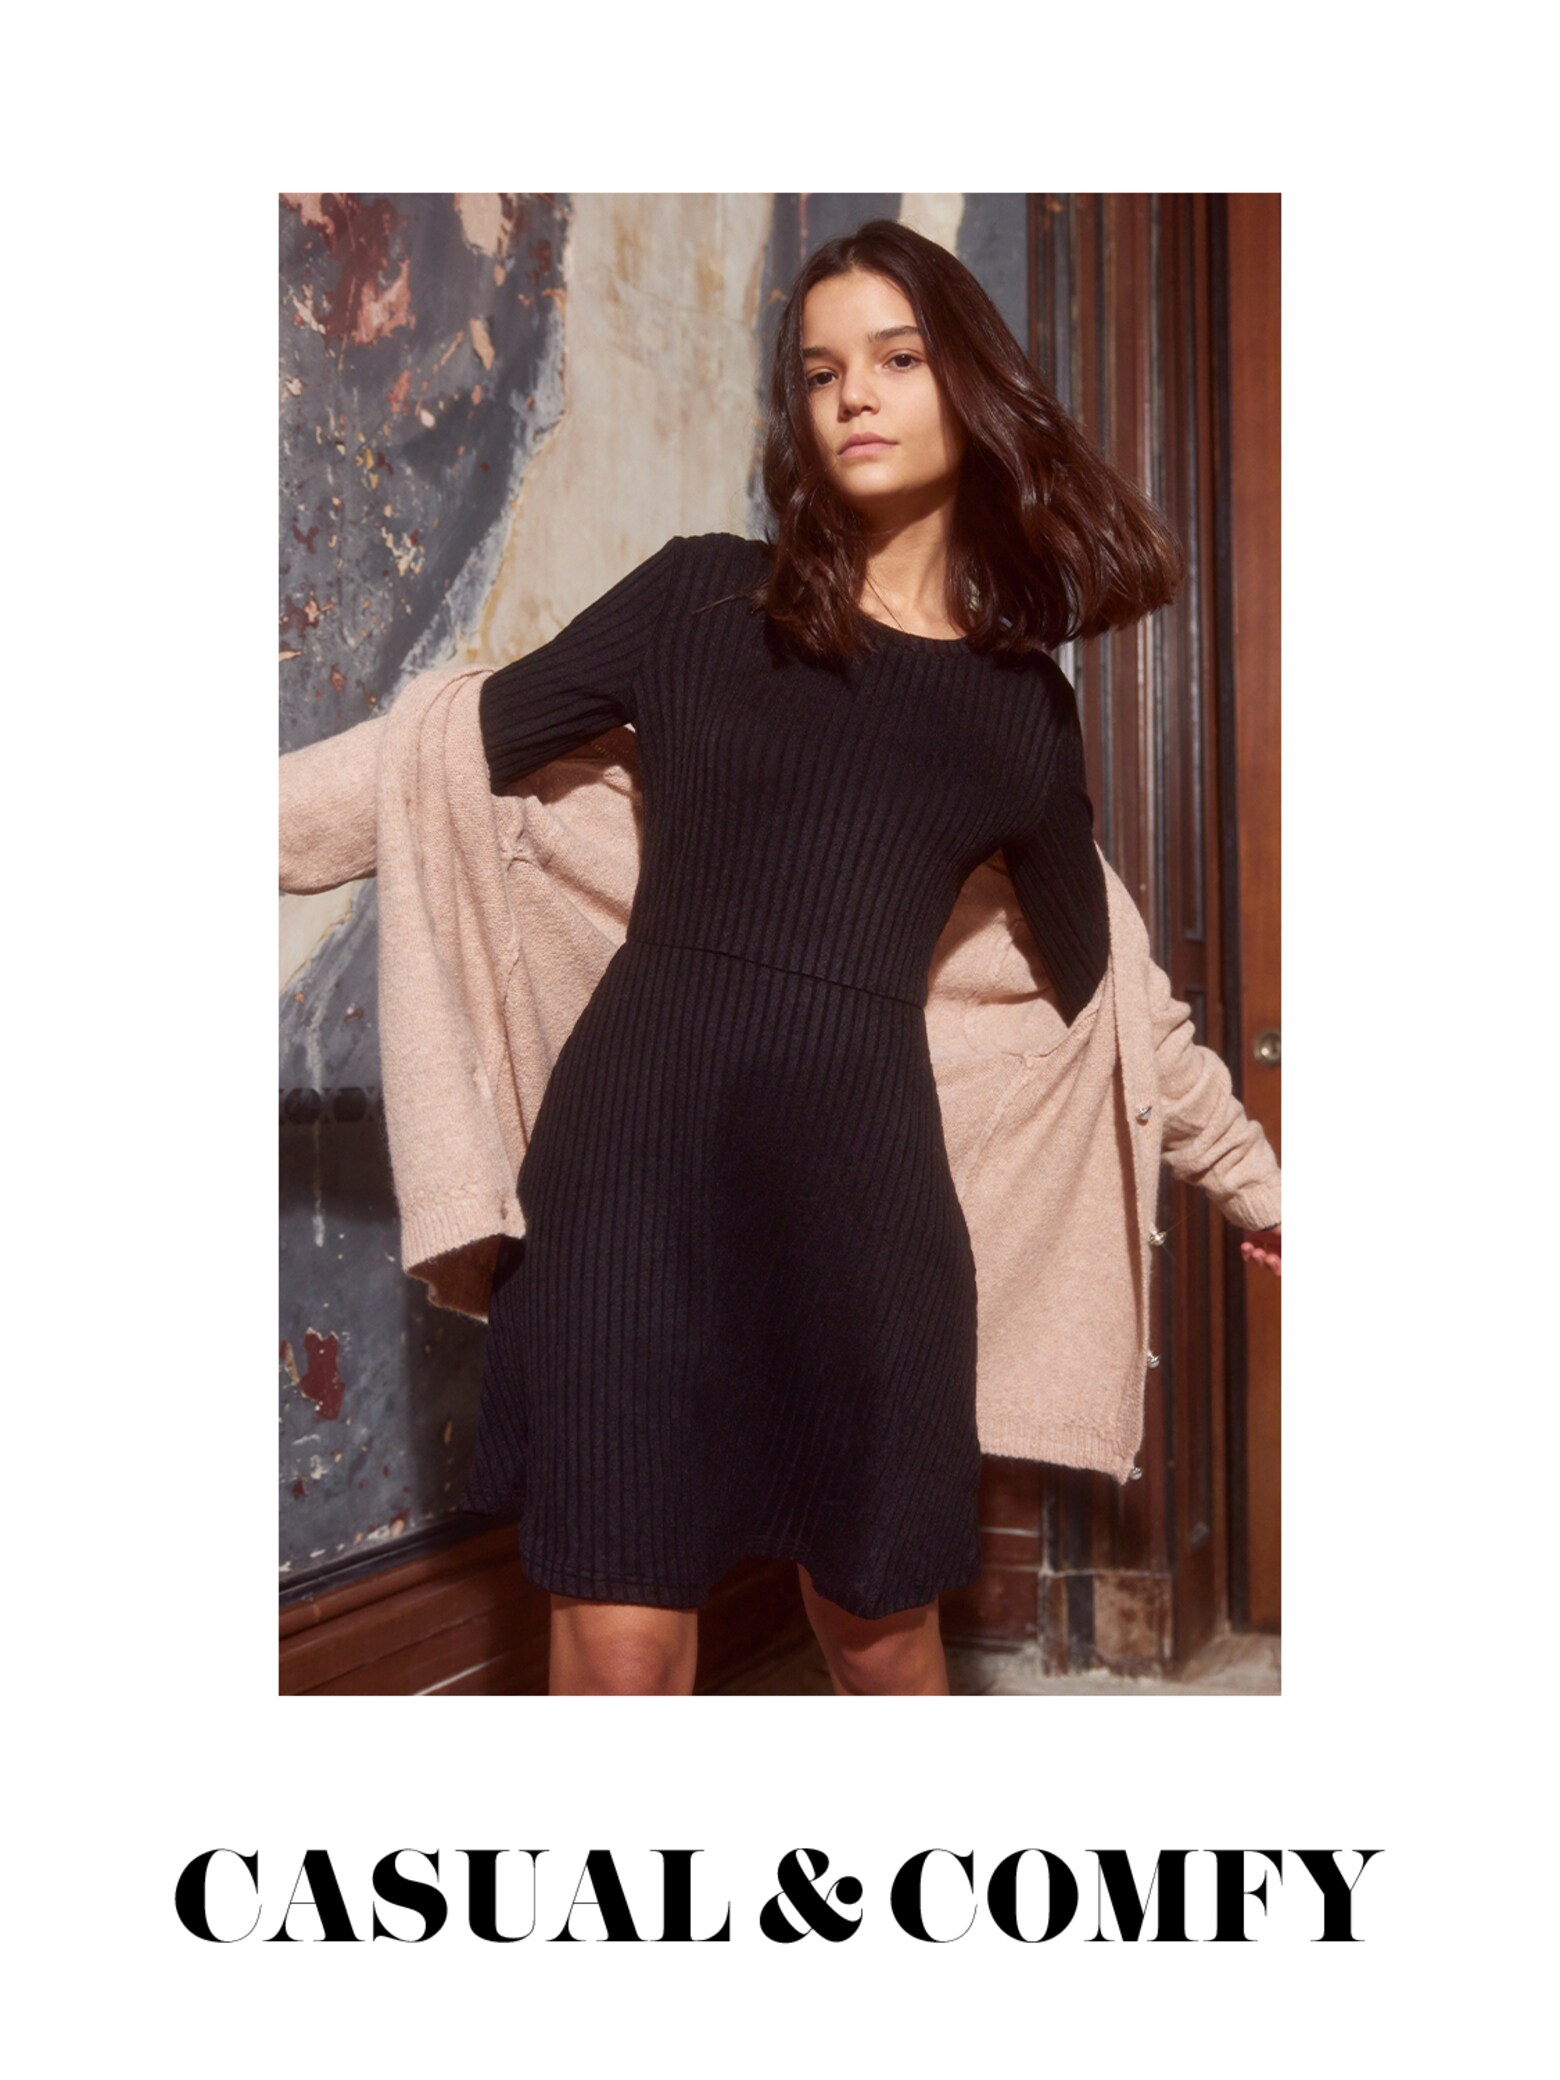 Cool and comfy Dresses for every day